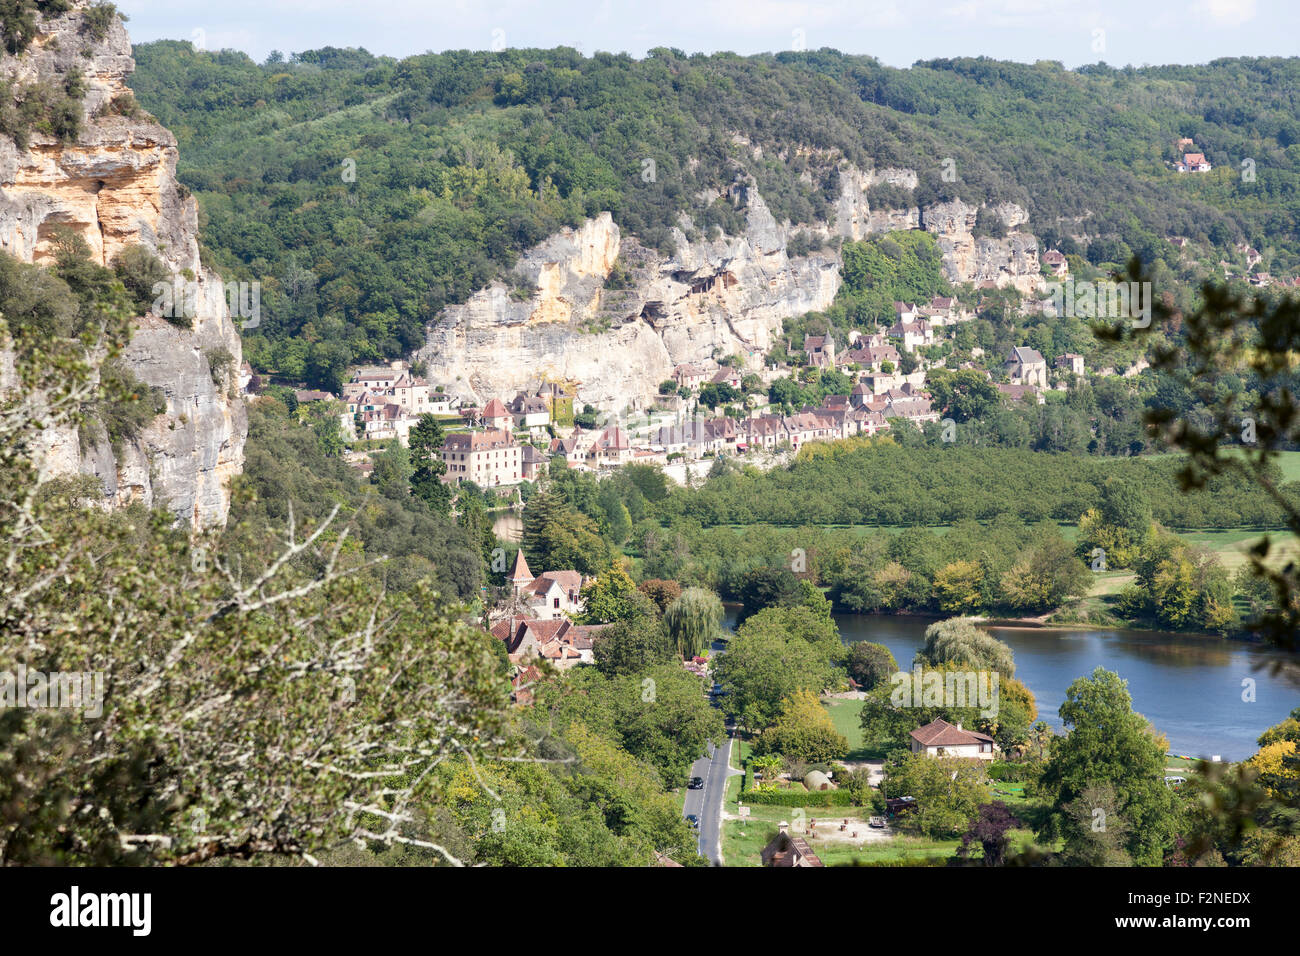 La Roque Gageac , one of the most beautiful villages of France huddled between the cliff and the Dordogne river. Stock Photo